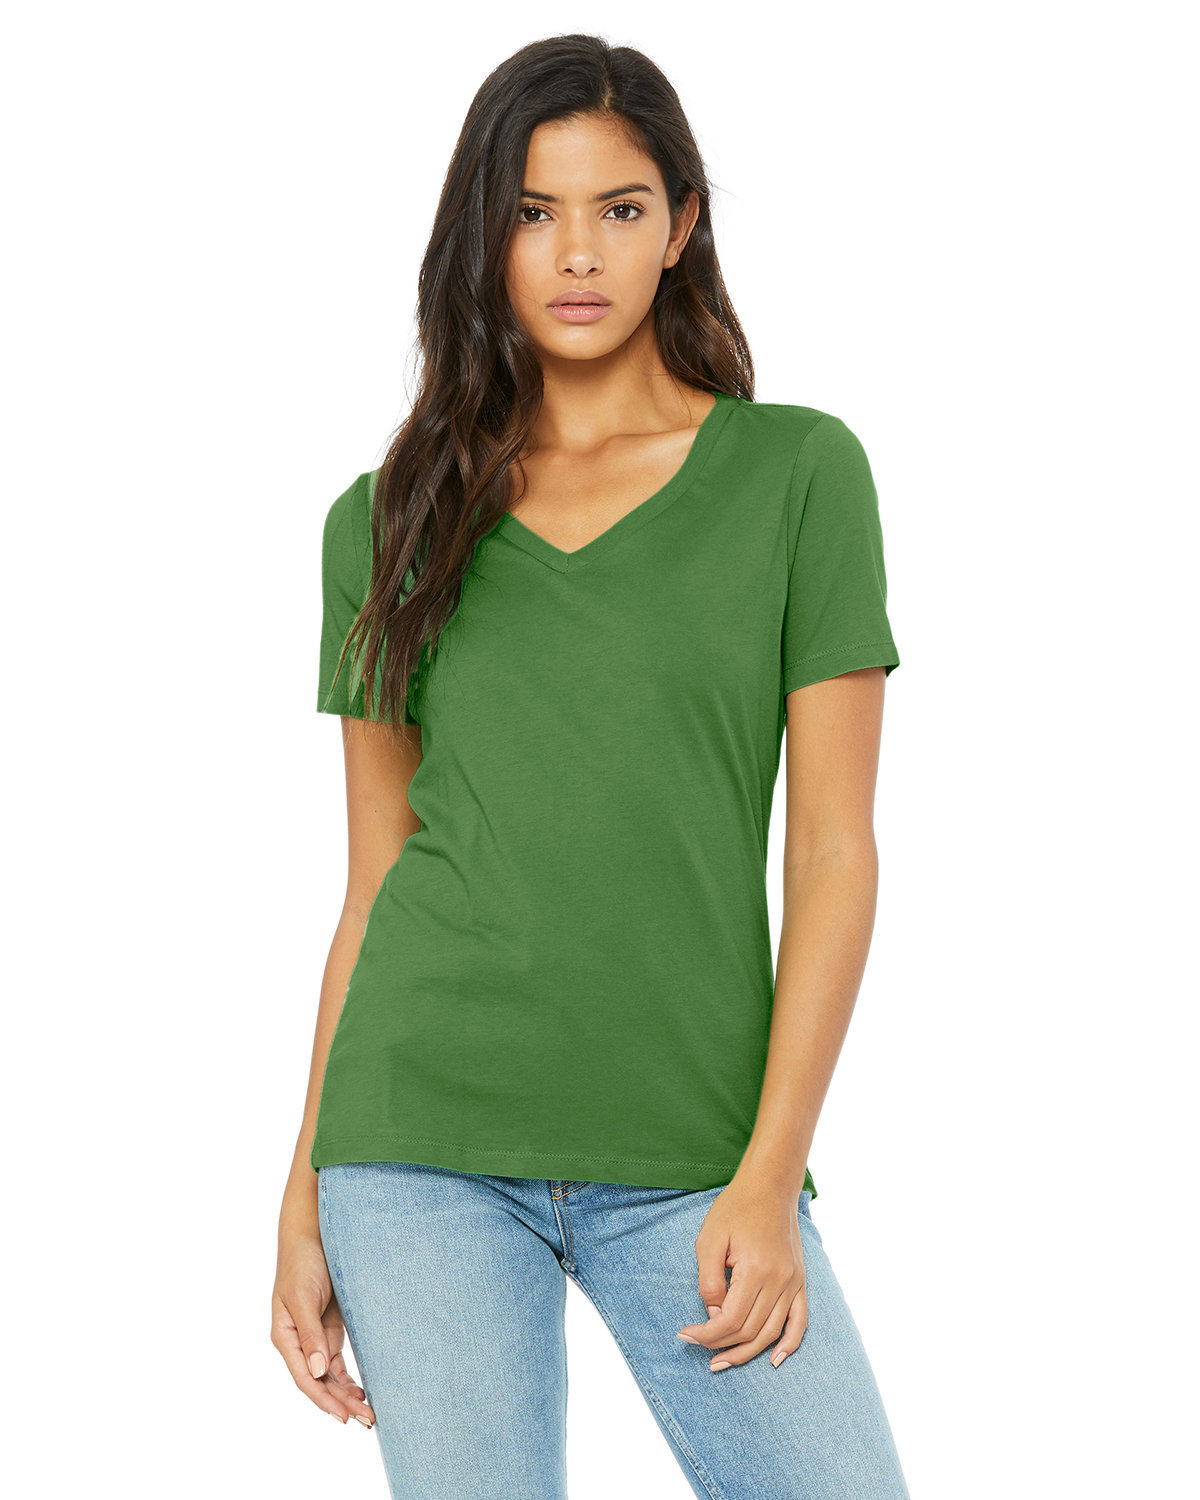 Bella + Canvas Ladies' Relaxed Jersey V-Neck T-Shirt LEAF 